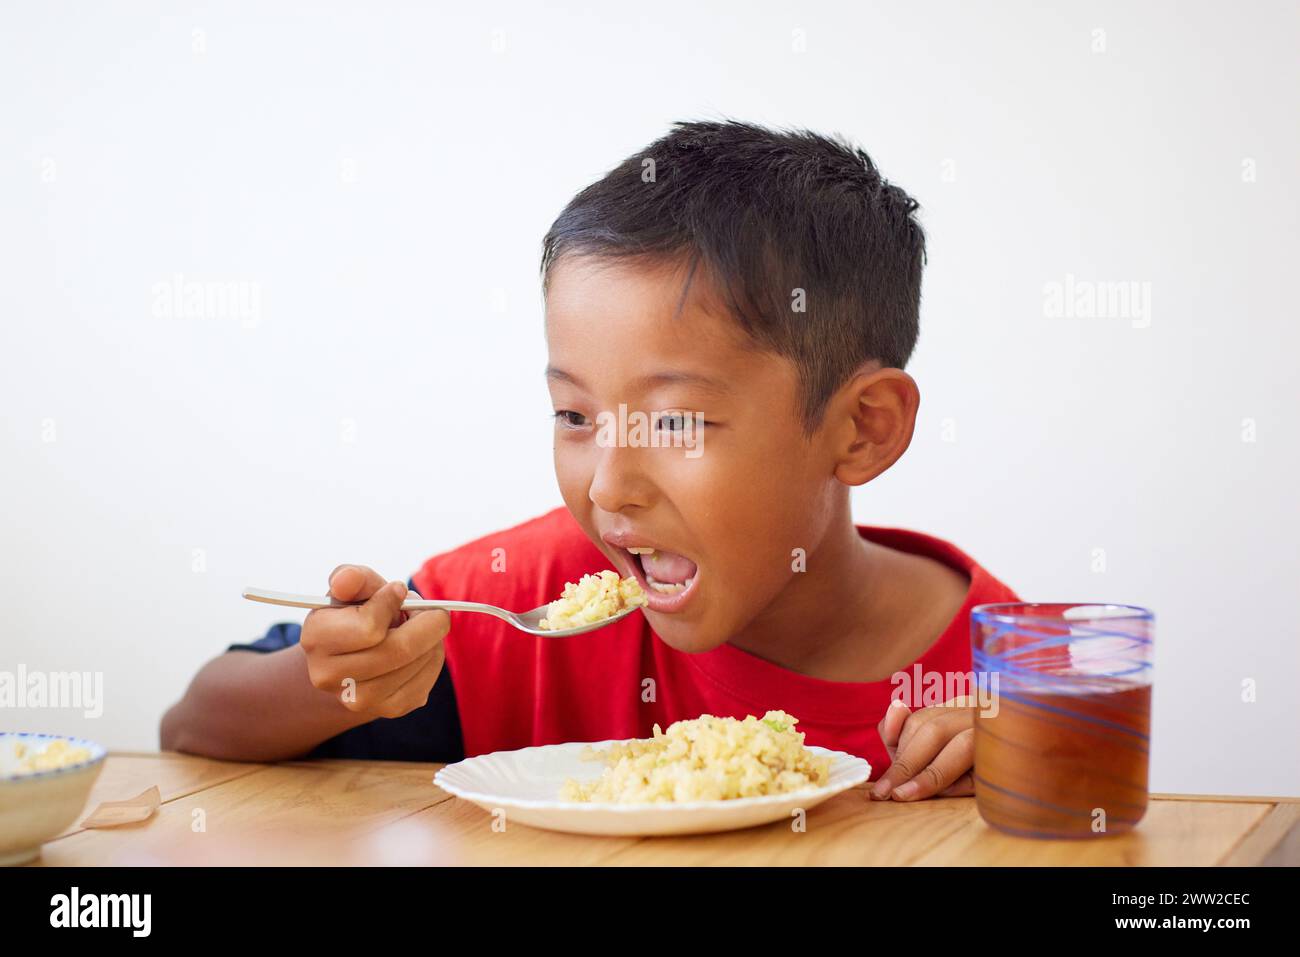 A boy eating food Stock Photo